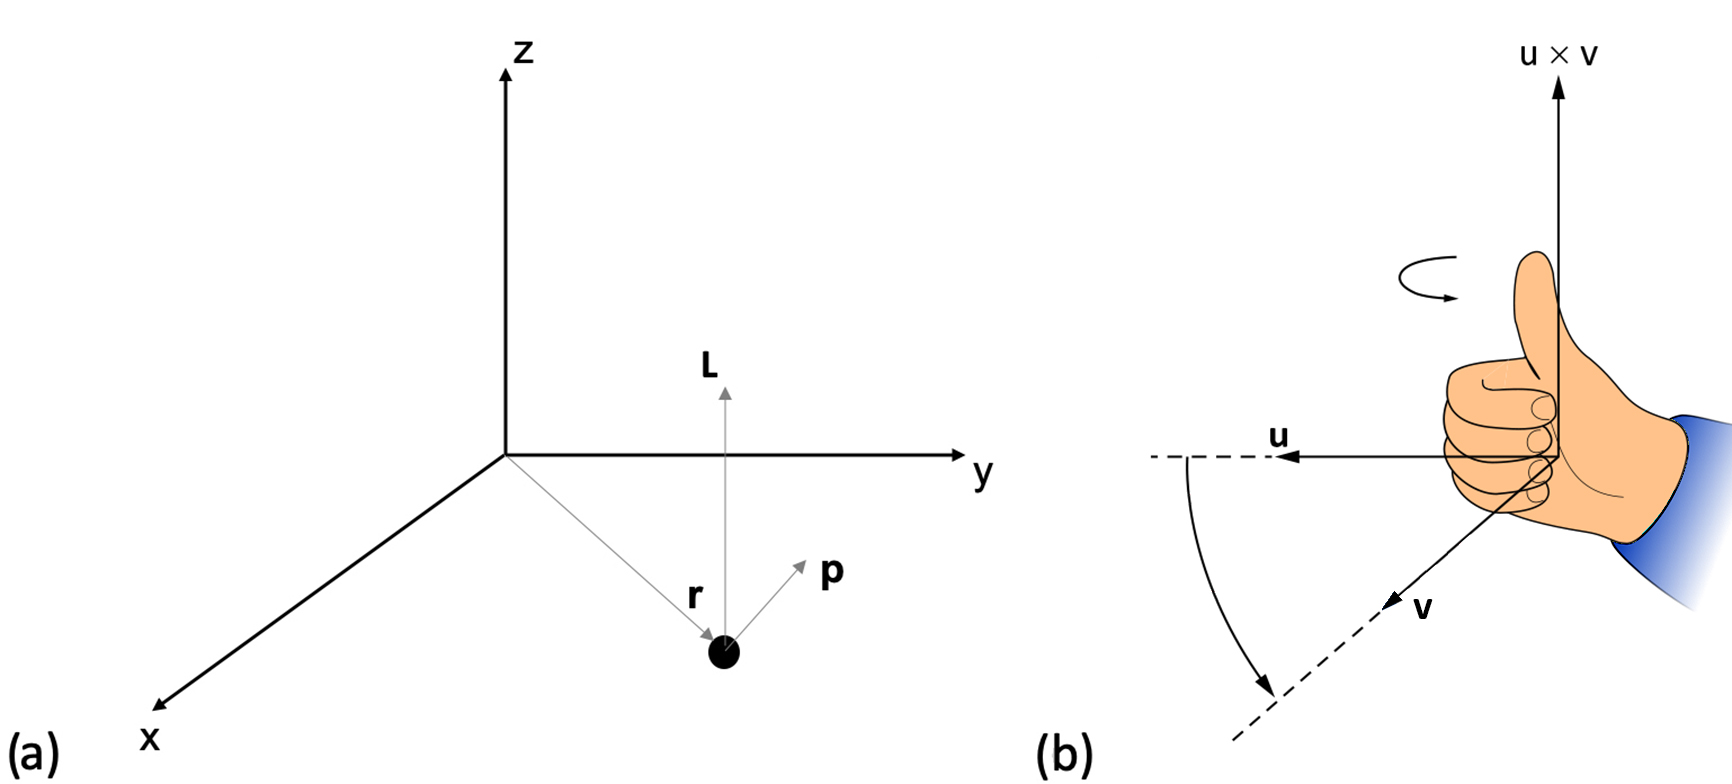 Image at left consisting of 3 black lines depicting a particle moving in the x-y plane with position vector r, and linear momentum p, which has angular momentum parallel to the z-axis. Image at right of a closed hand with the tumb up, demostrating the approximation of the right-hand rule.